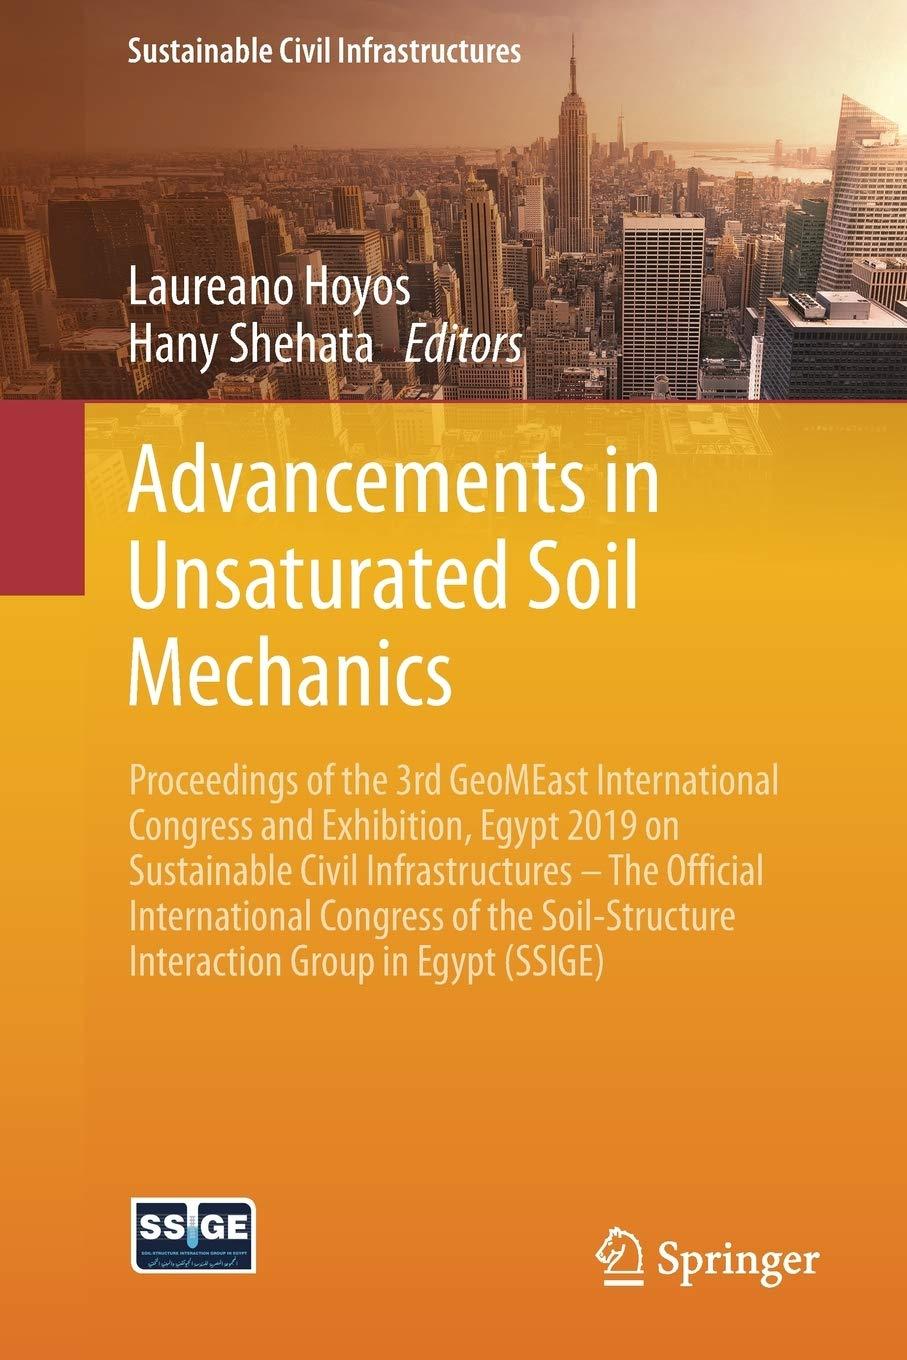 advancements in unsaturated soil mechanics proceedings of the 3rd geomeast international congress and